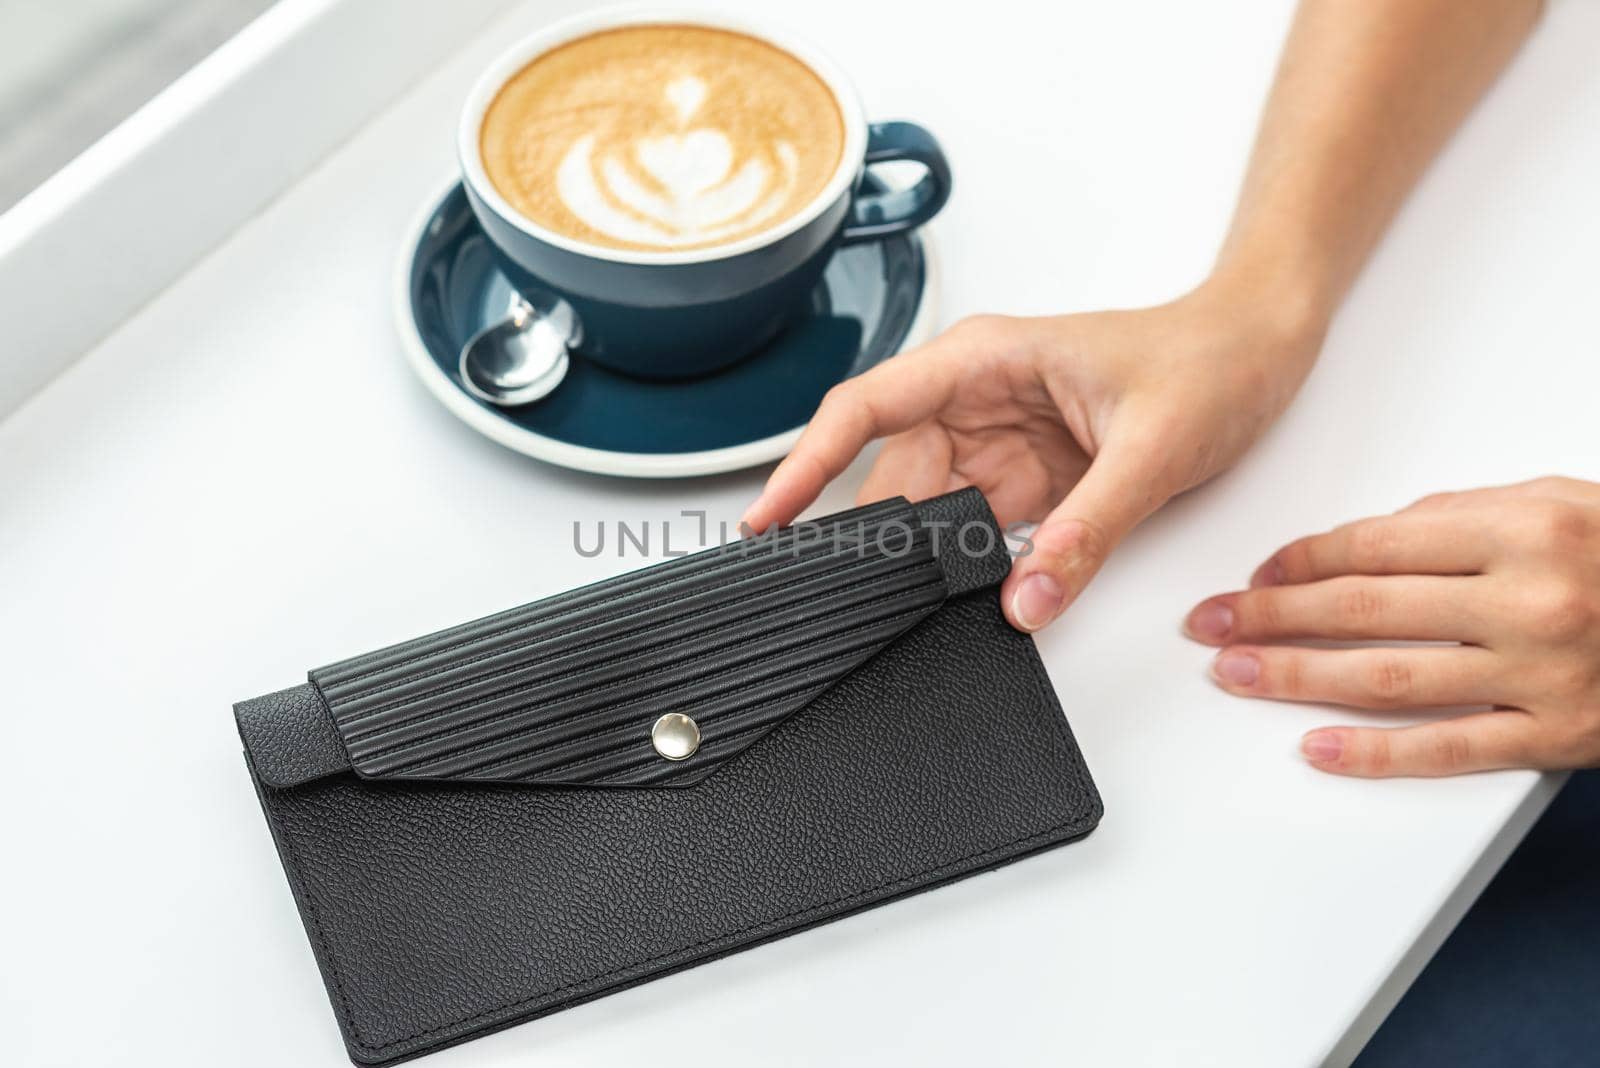 Wallet on a white table with a cup of coffee